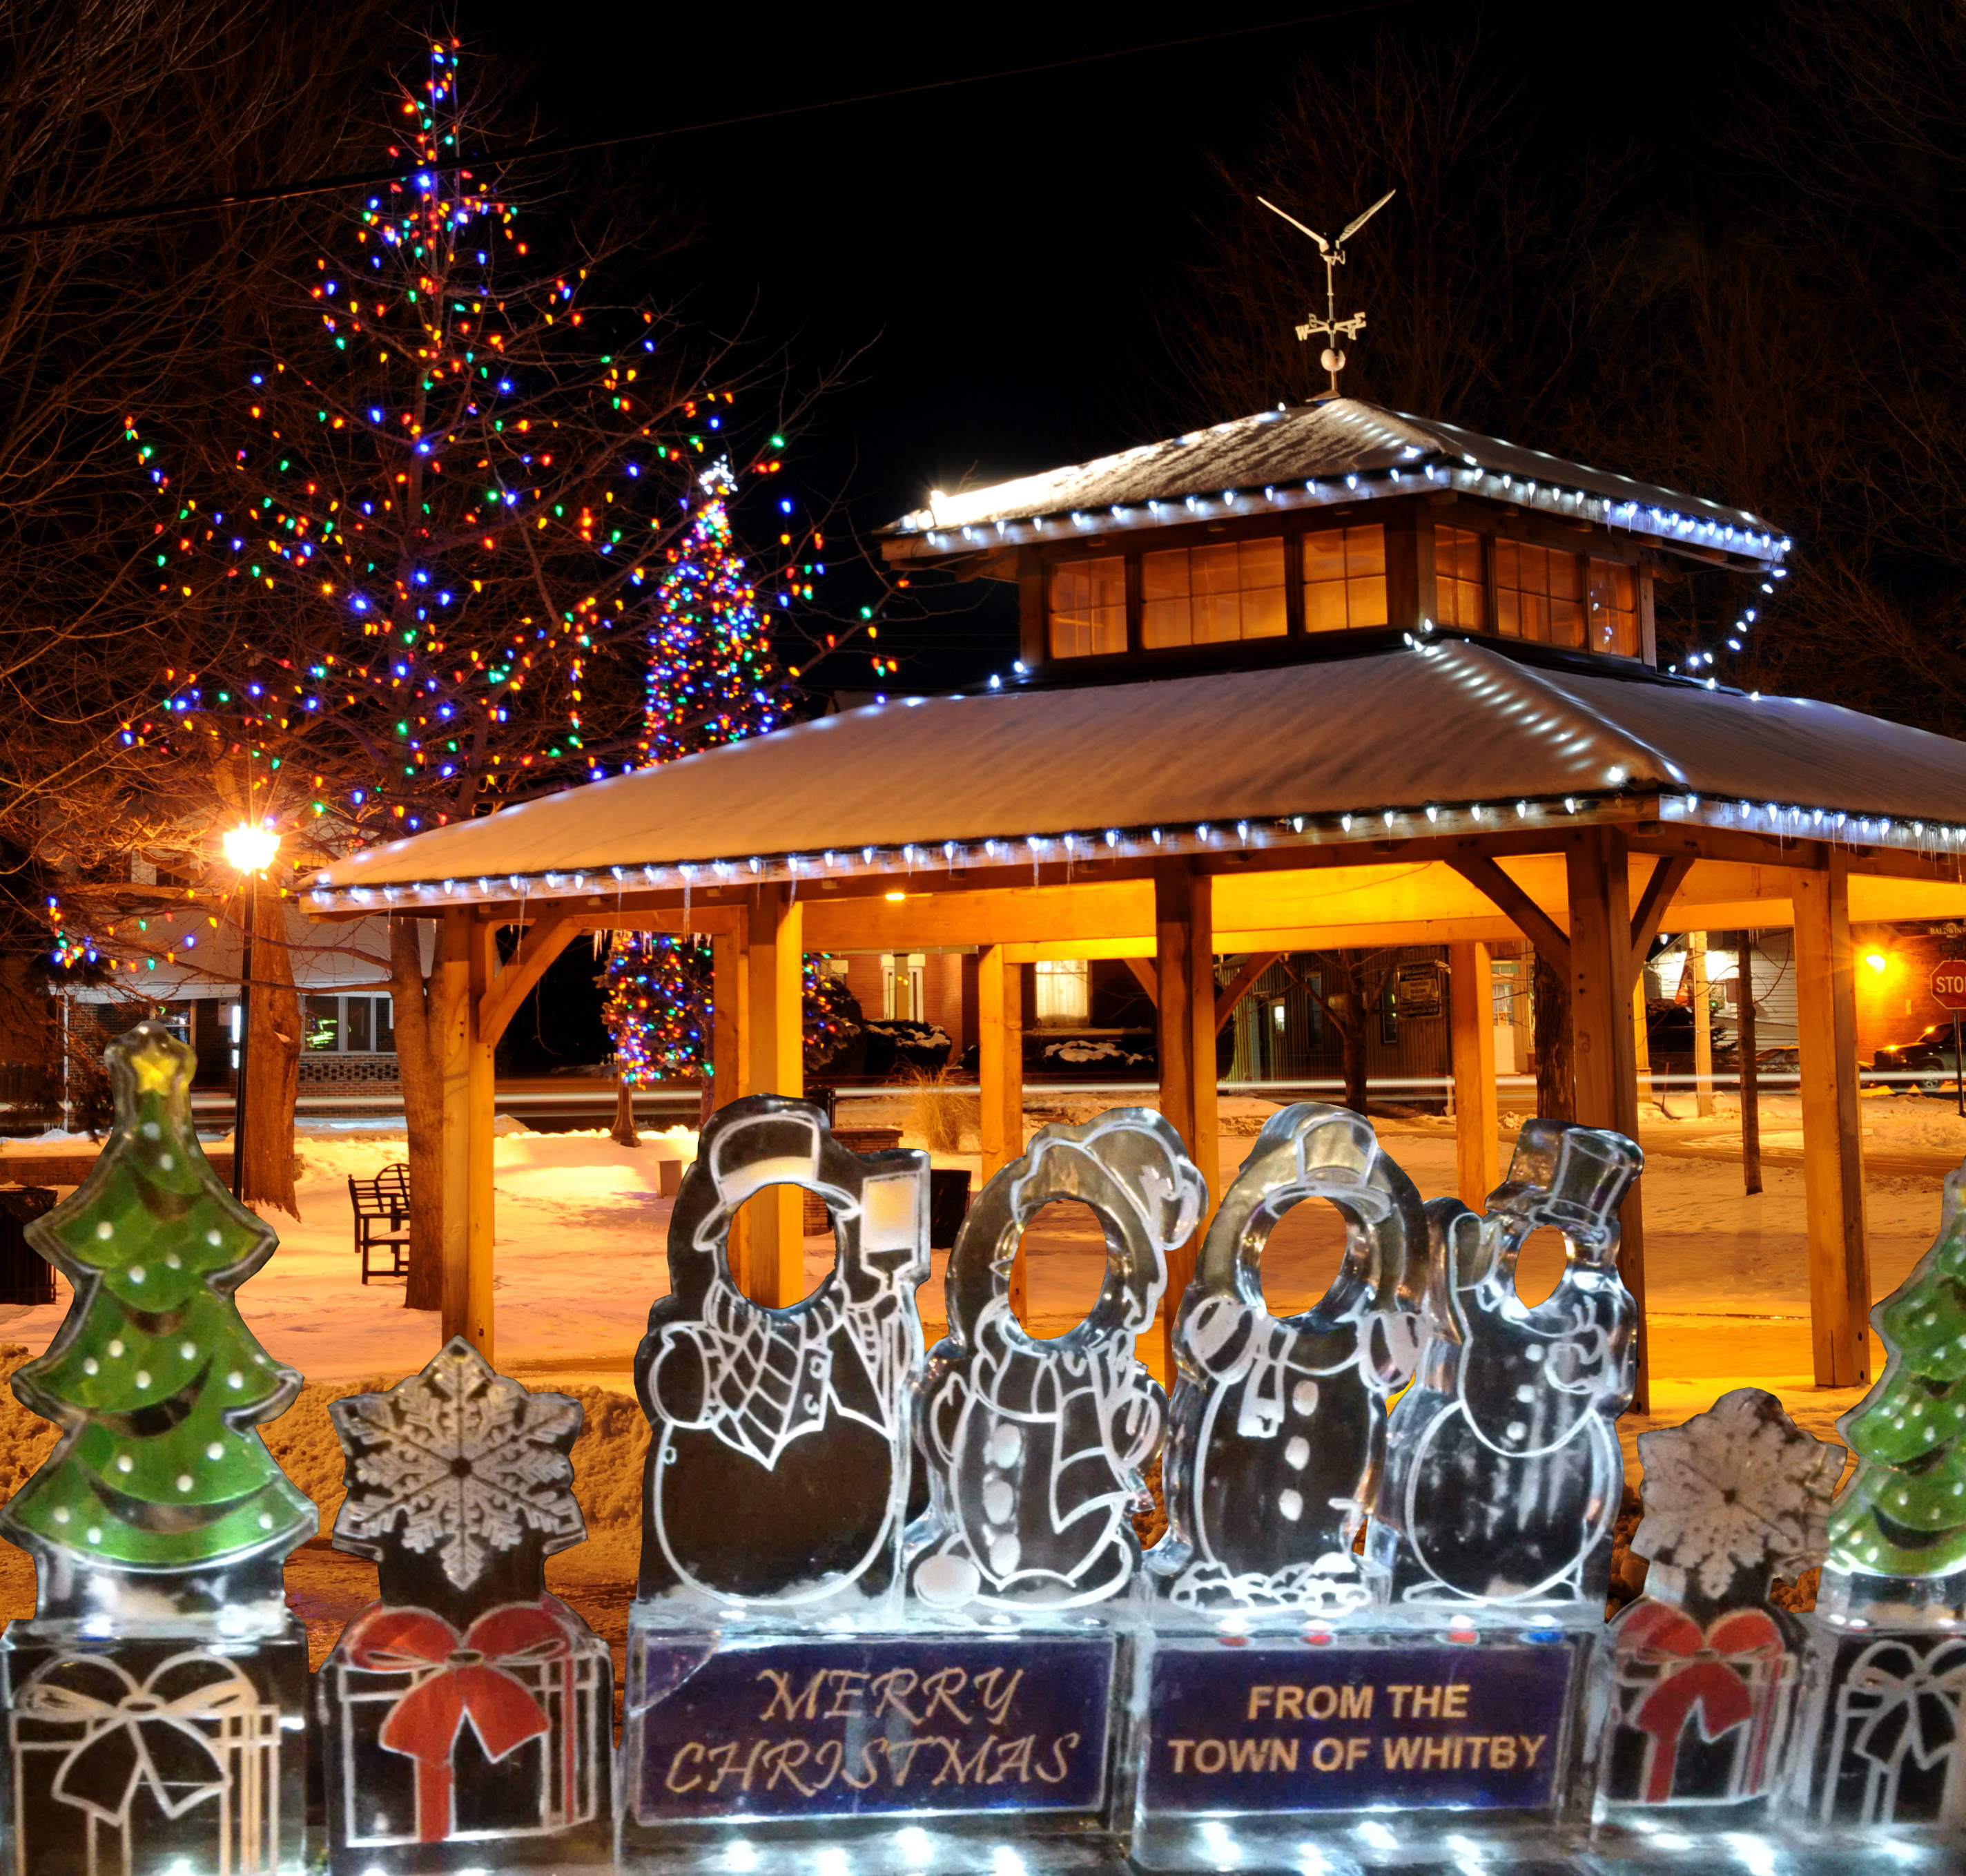 Image of gazebo and trees lit up in lights and snowman decoration that says Merry Christmas.